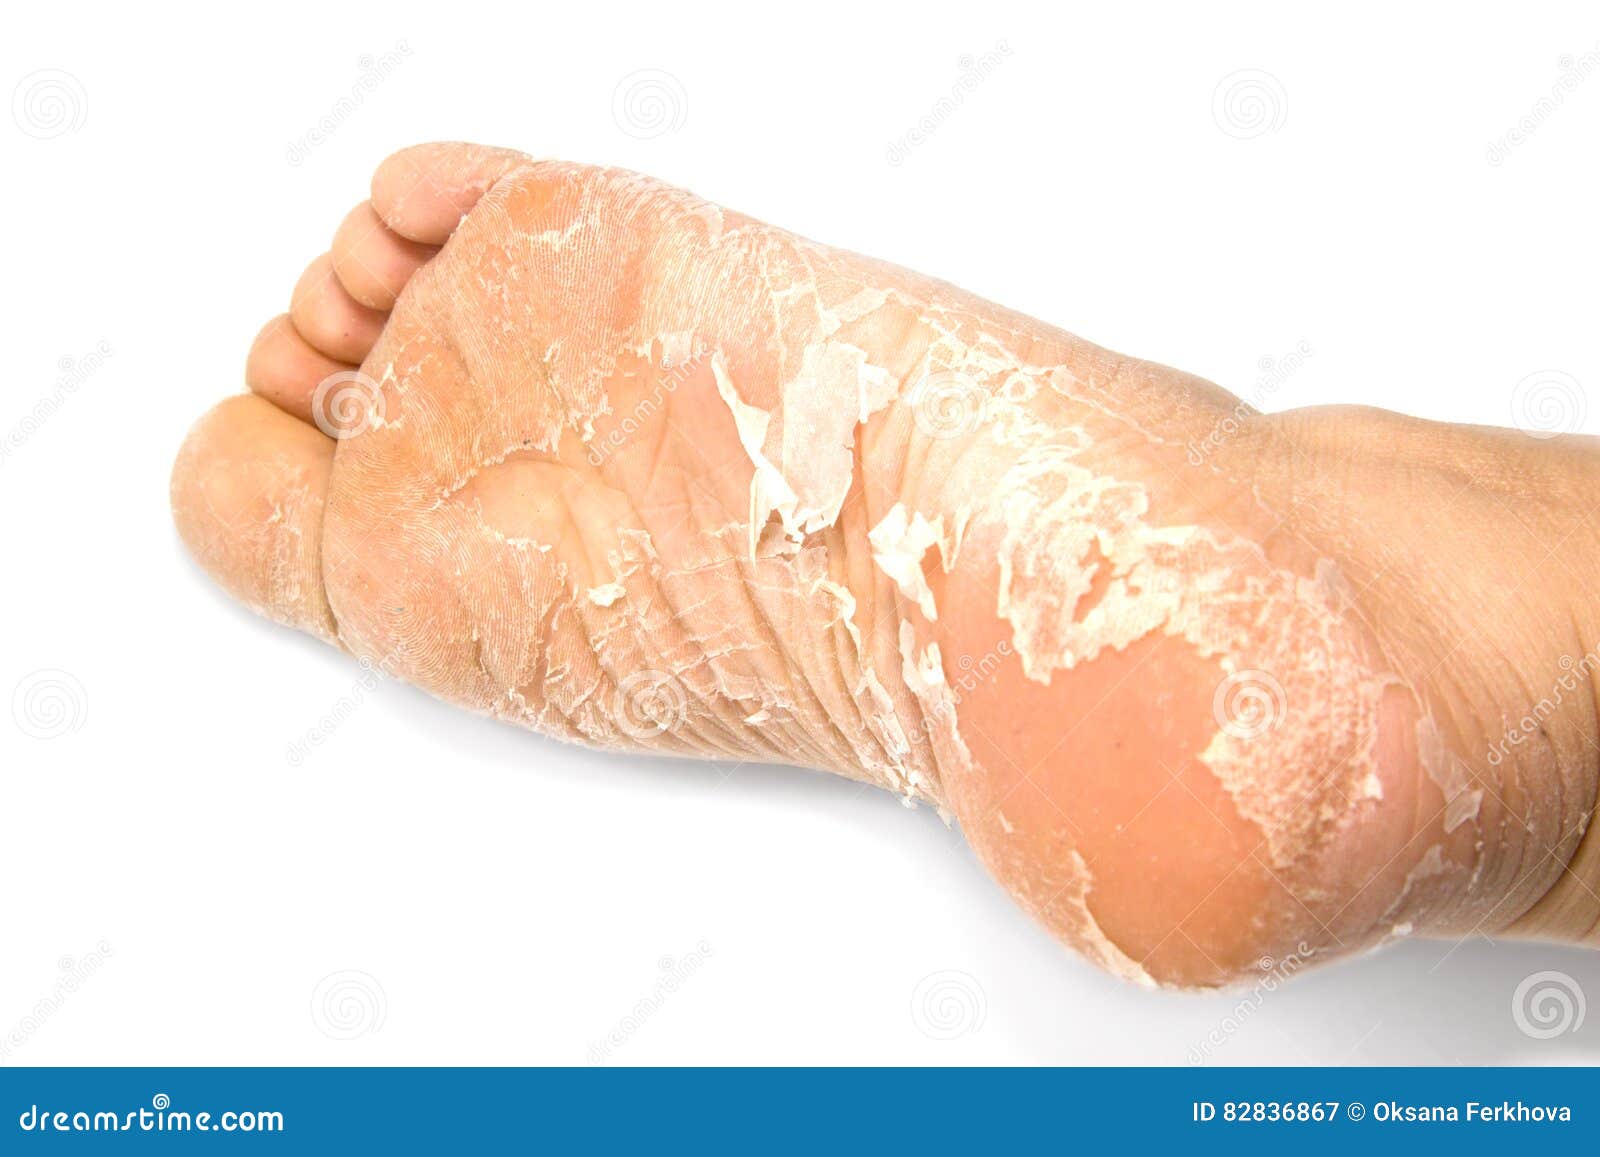 The Best Solution For Dry Cracked Feet. – Dermatologist's Choice Skincare